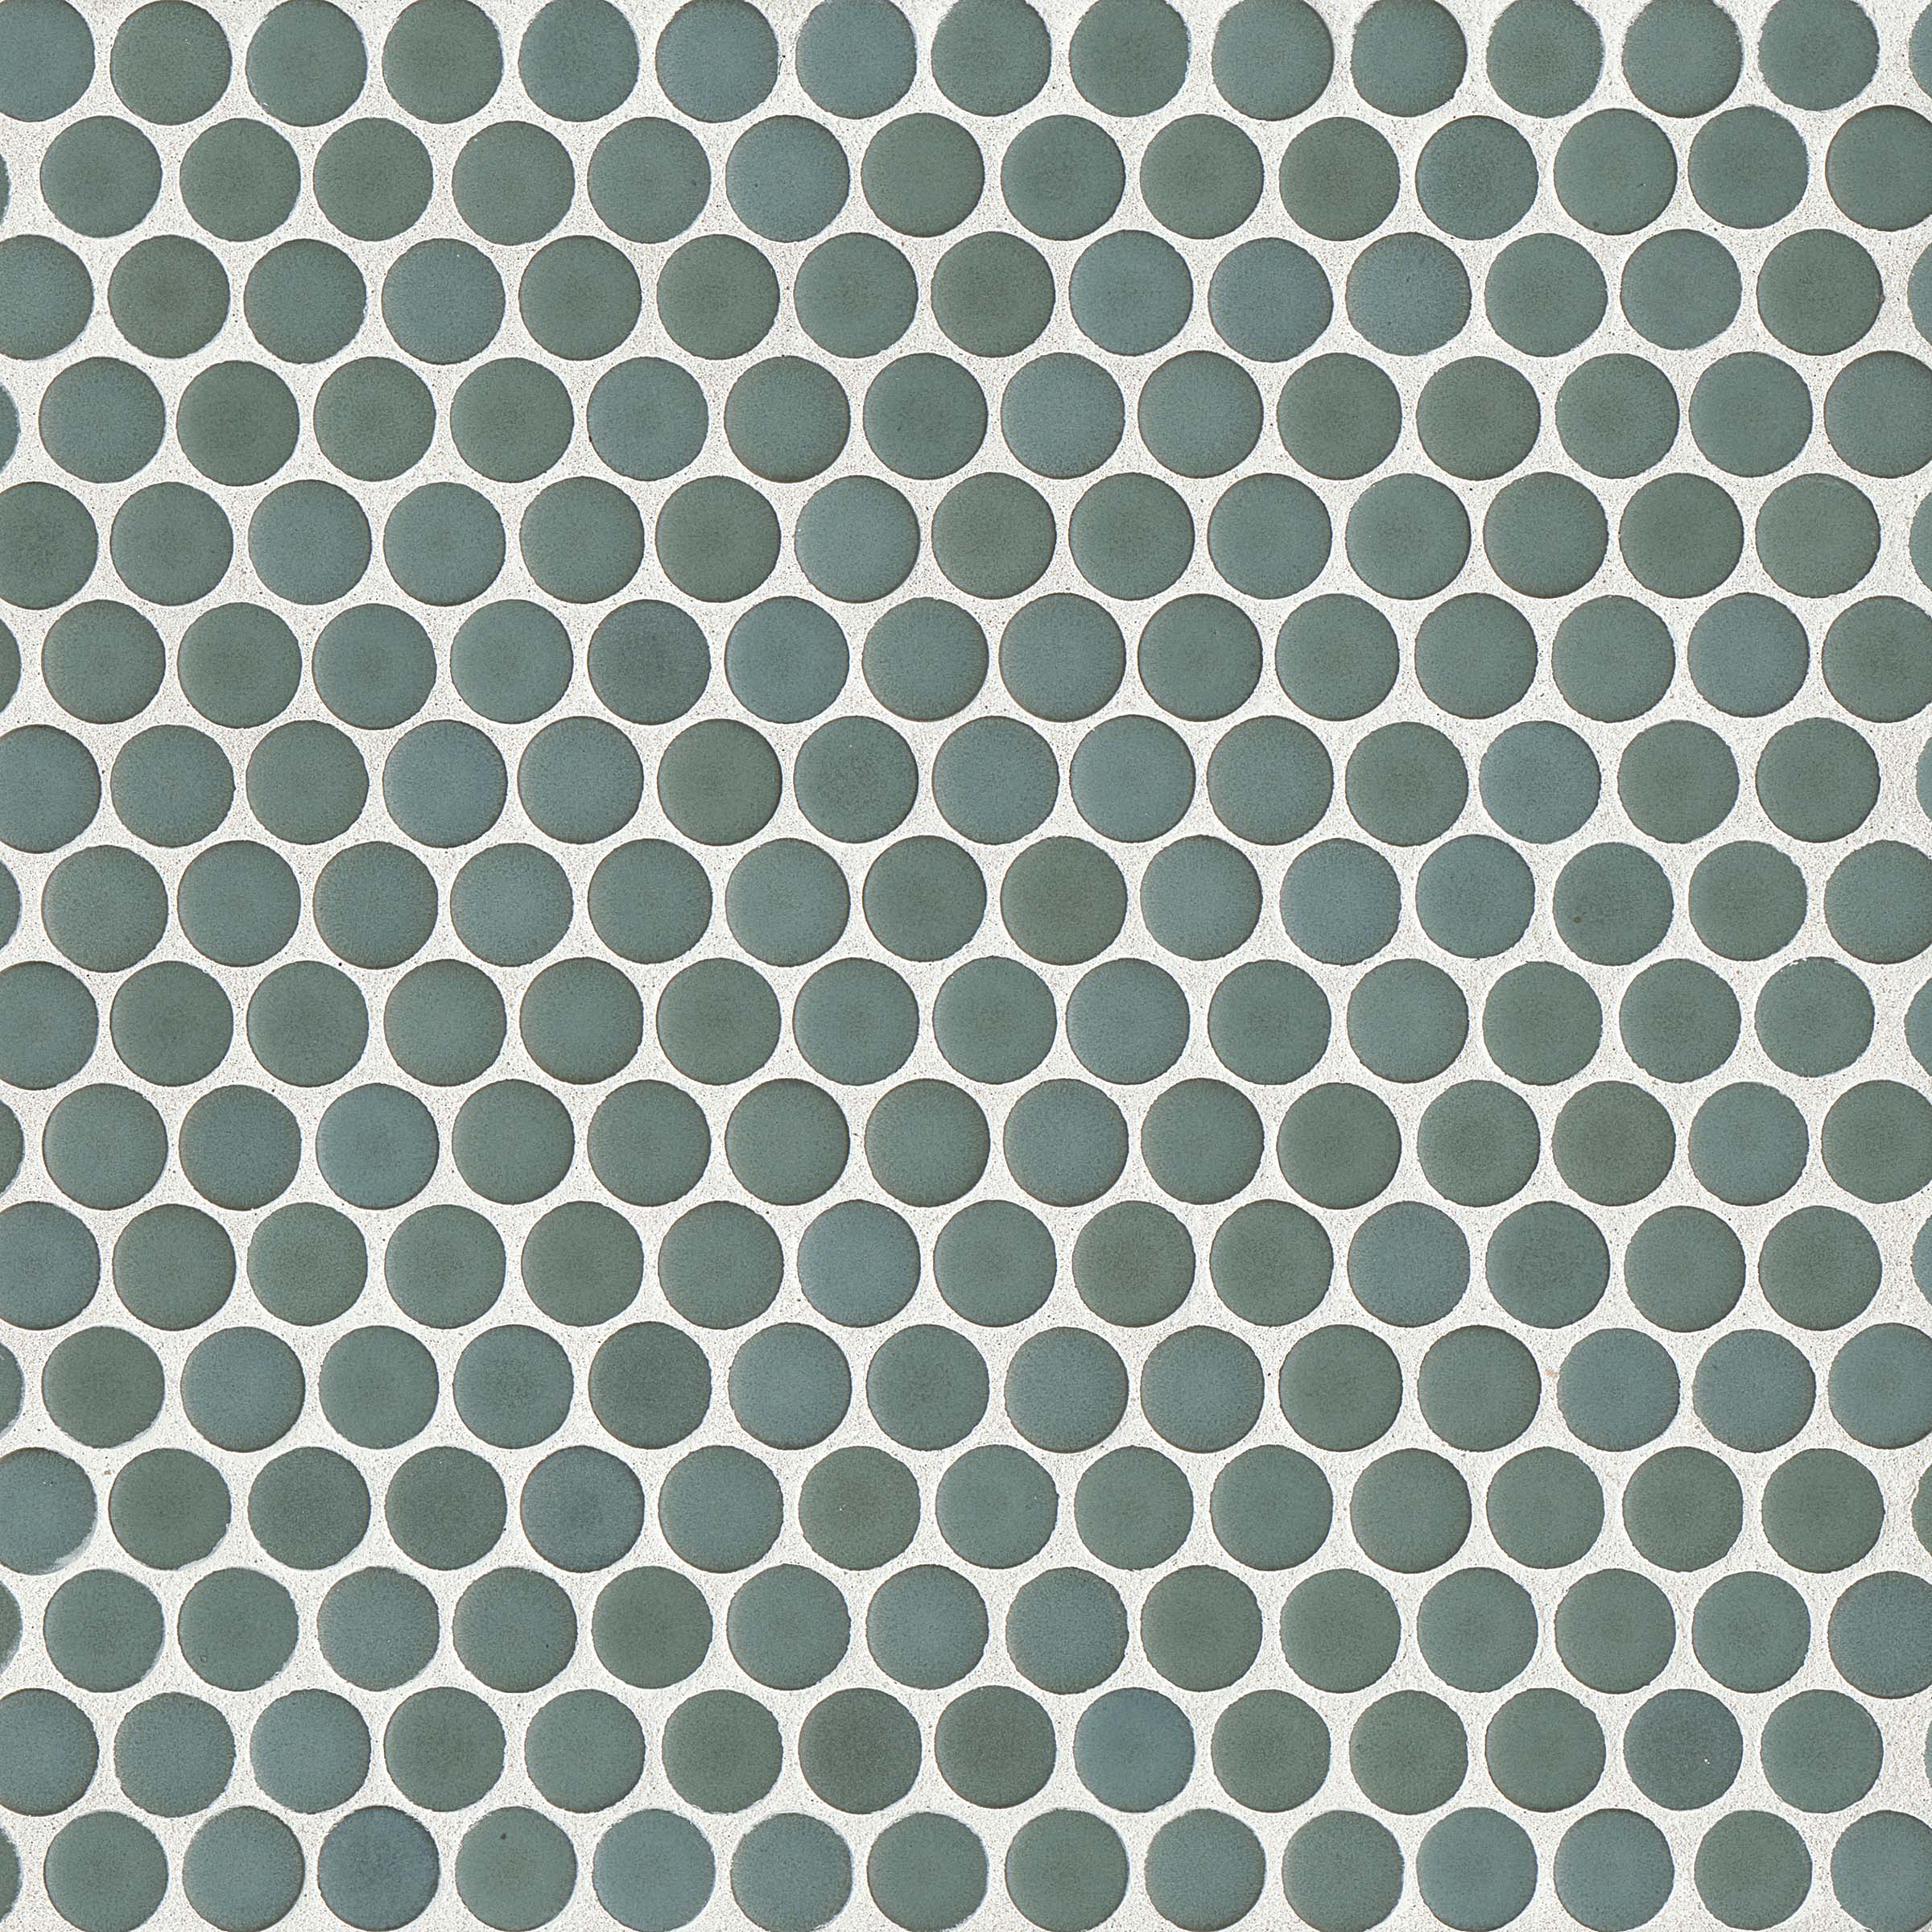 Silver Fabric Glass Subway Mosaic Tile  Online Tile Store with Free  Shipping on Qualifying Orders